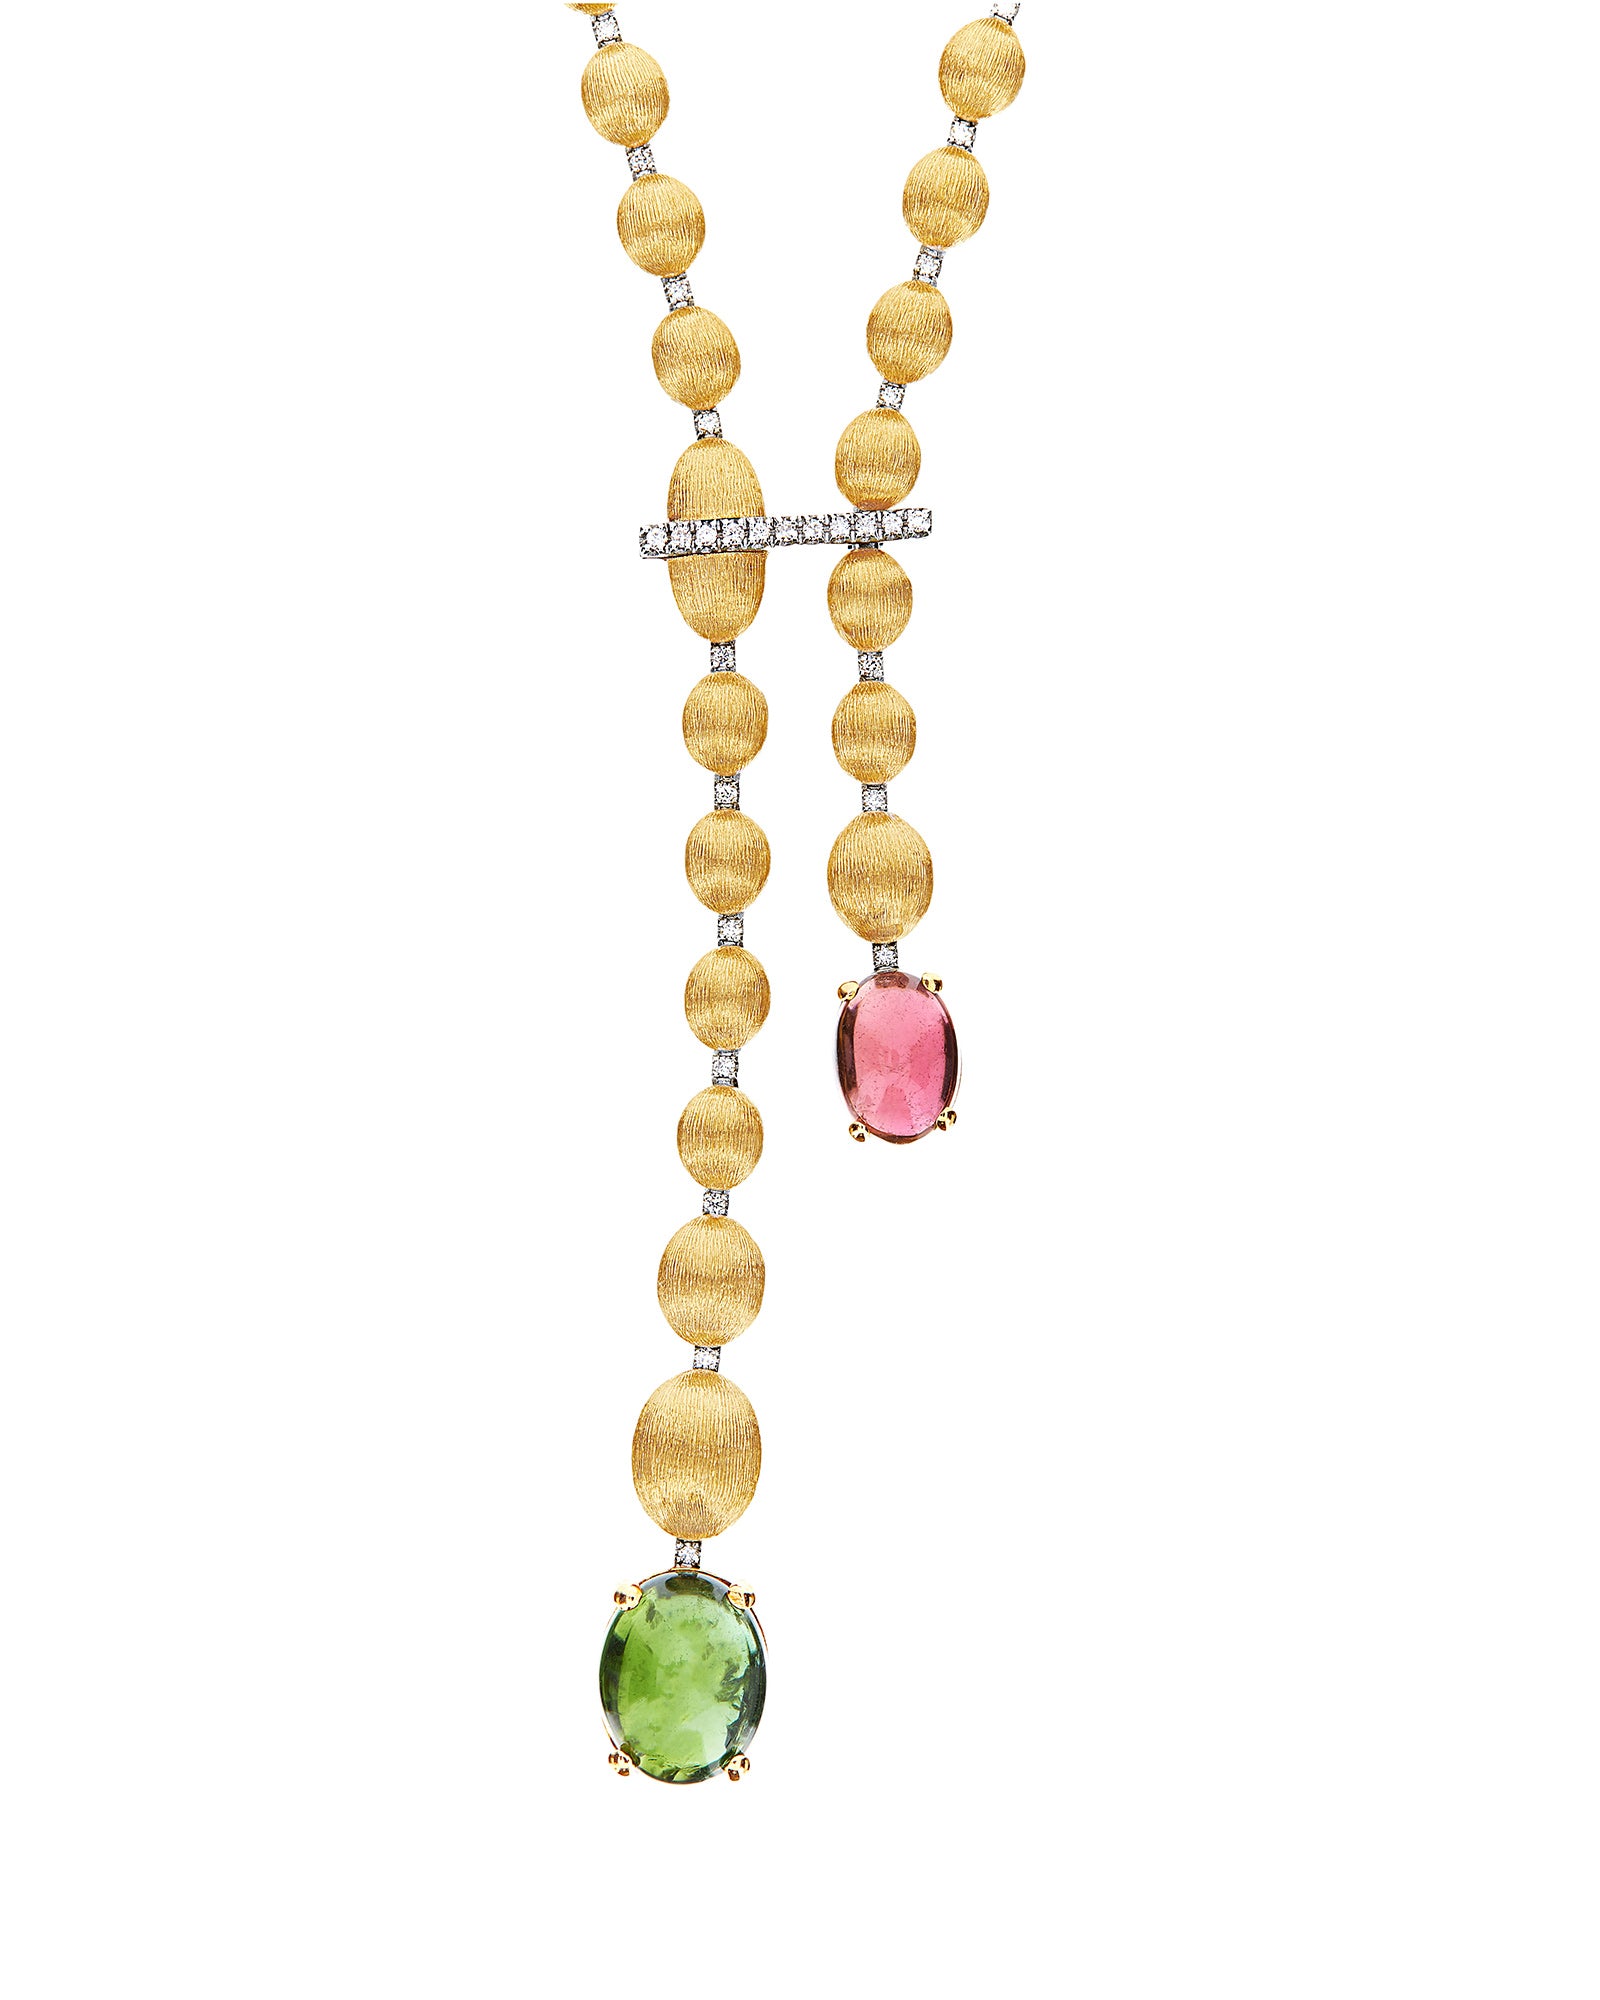 "Tourmalines" Gold and Diamonds, Pink and Green Tourmalines Necklace (short)